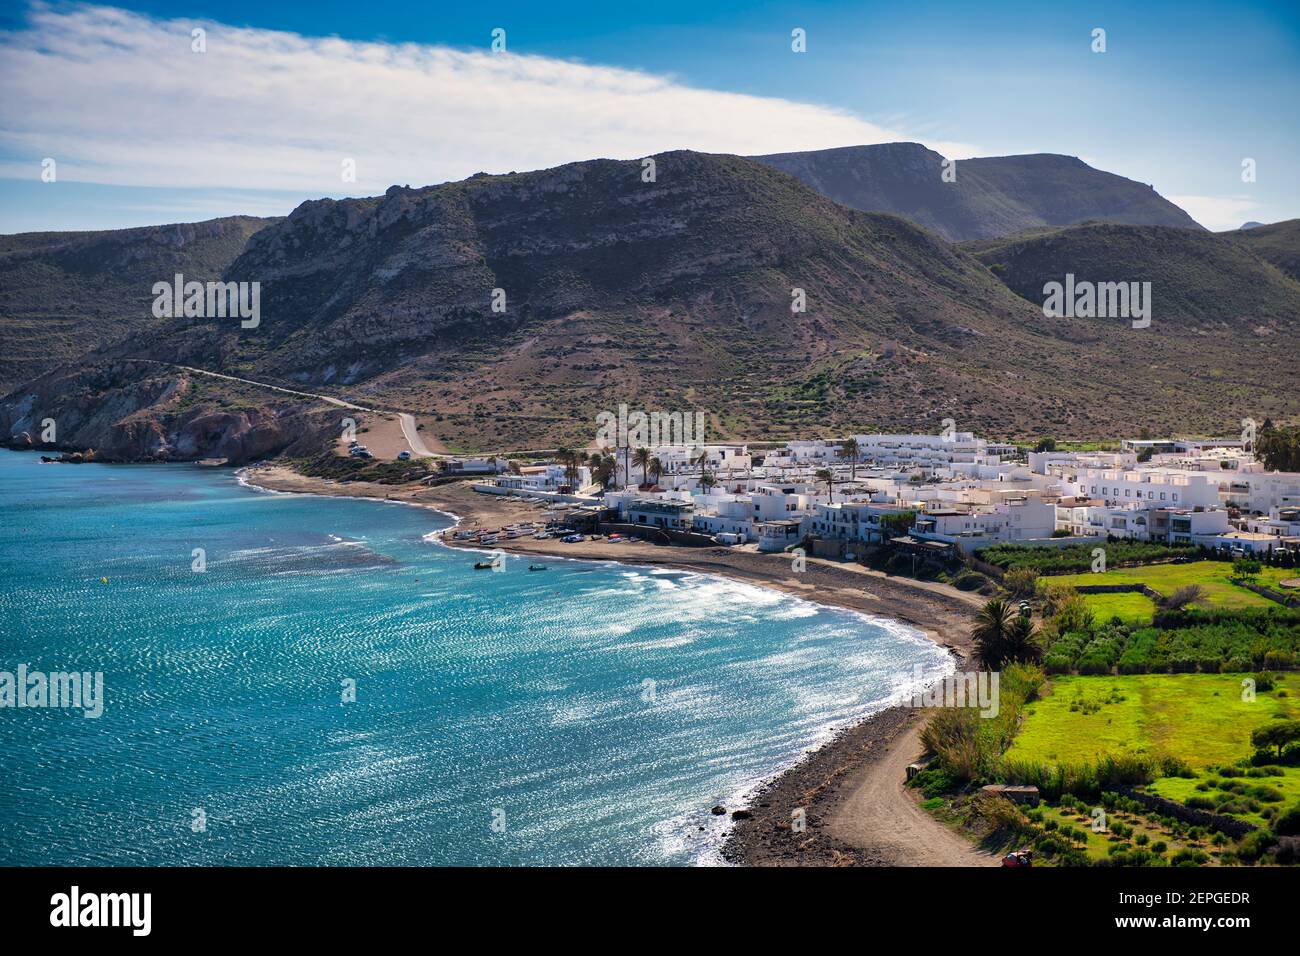 Village between mountains, belonging to Nijar, Almeria. Las Negras is a  paradise bathed by the waters of the Mediterranean. High quality  photography Stock Photo - Alamy